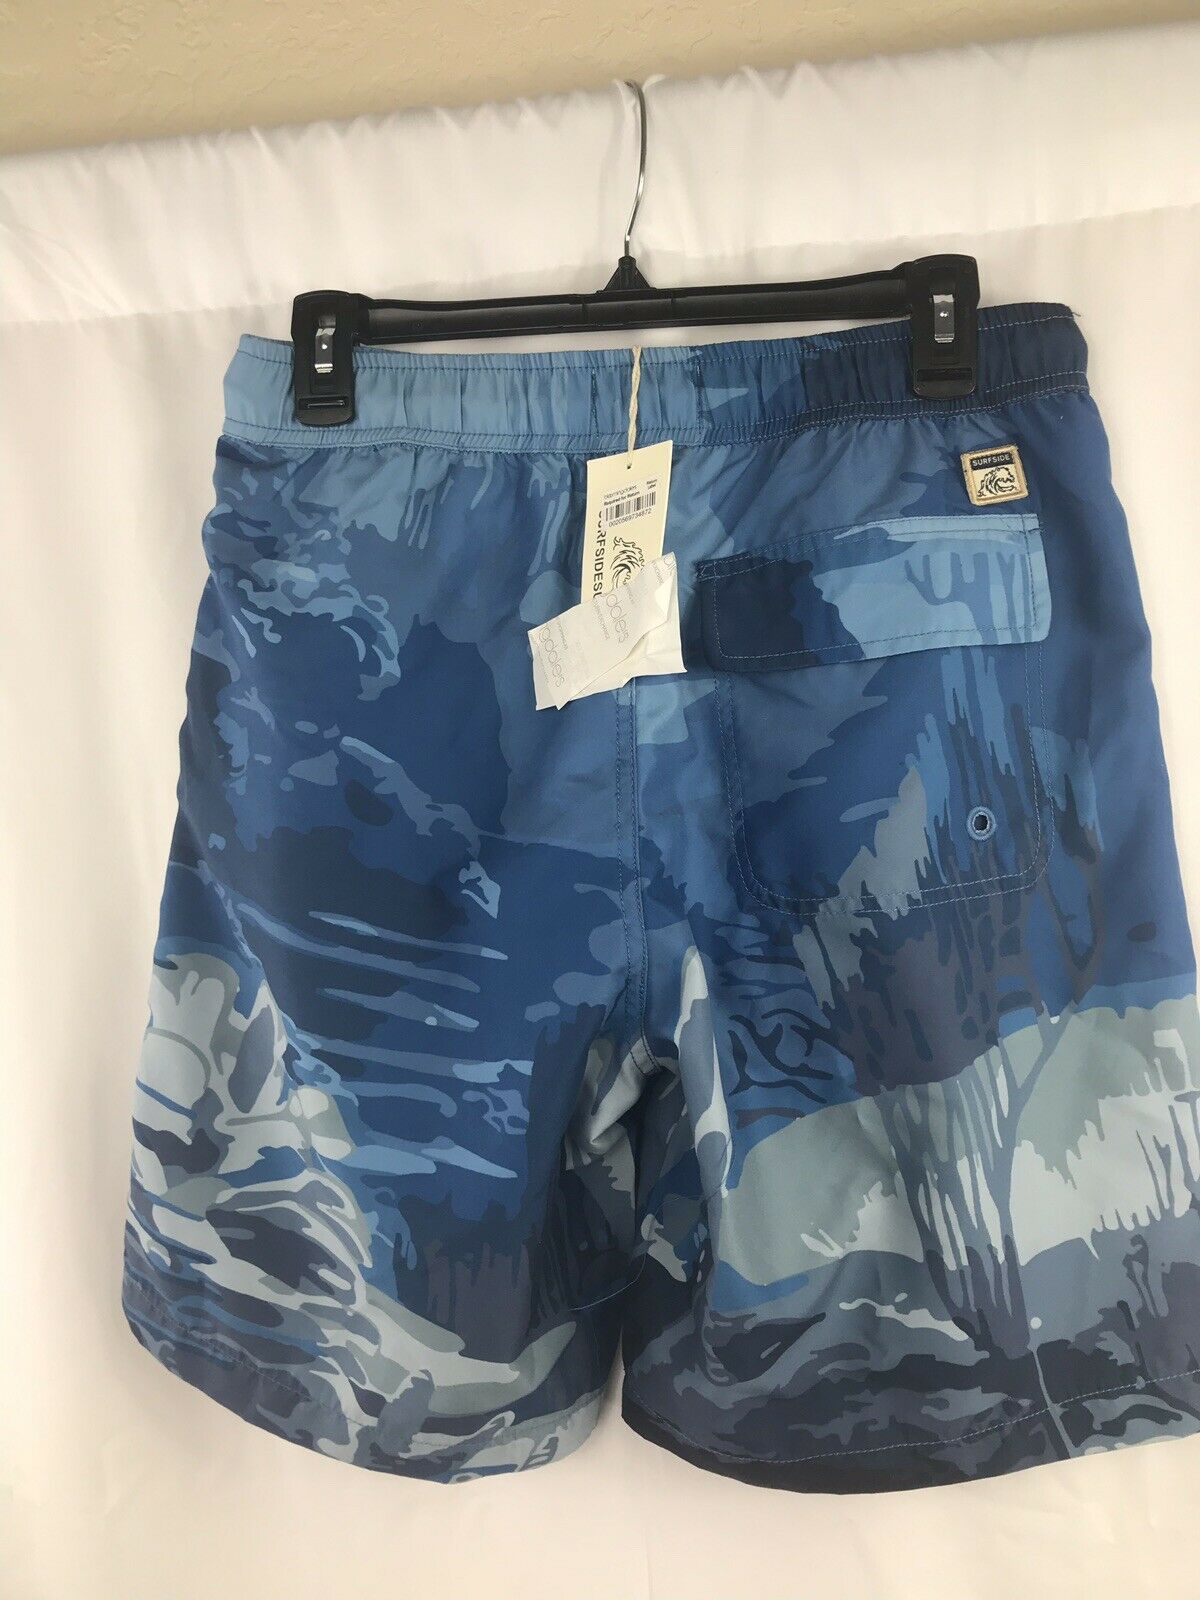 Surfside Supply Deep Water Coral Reef Volley Swim Trunks - Outlet Designers